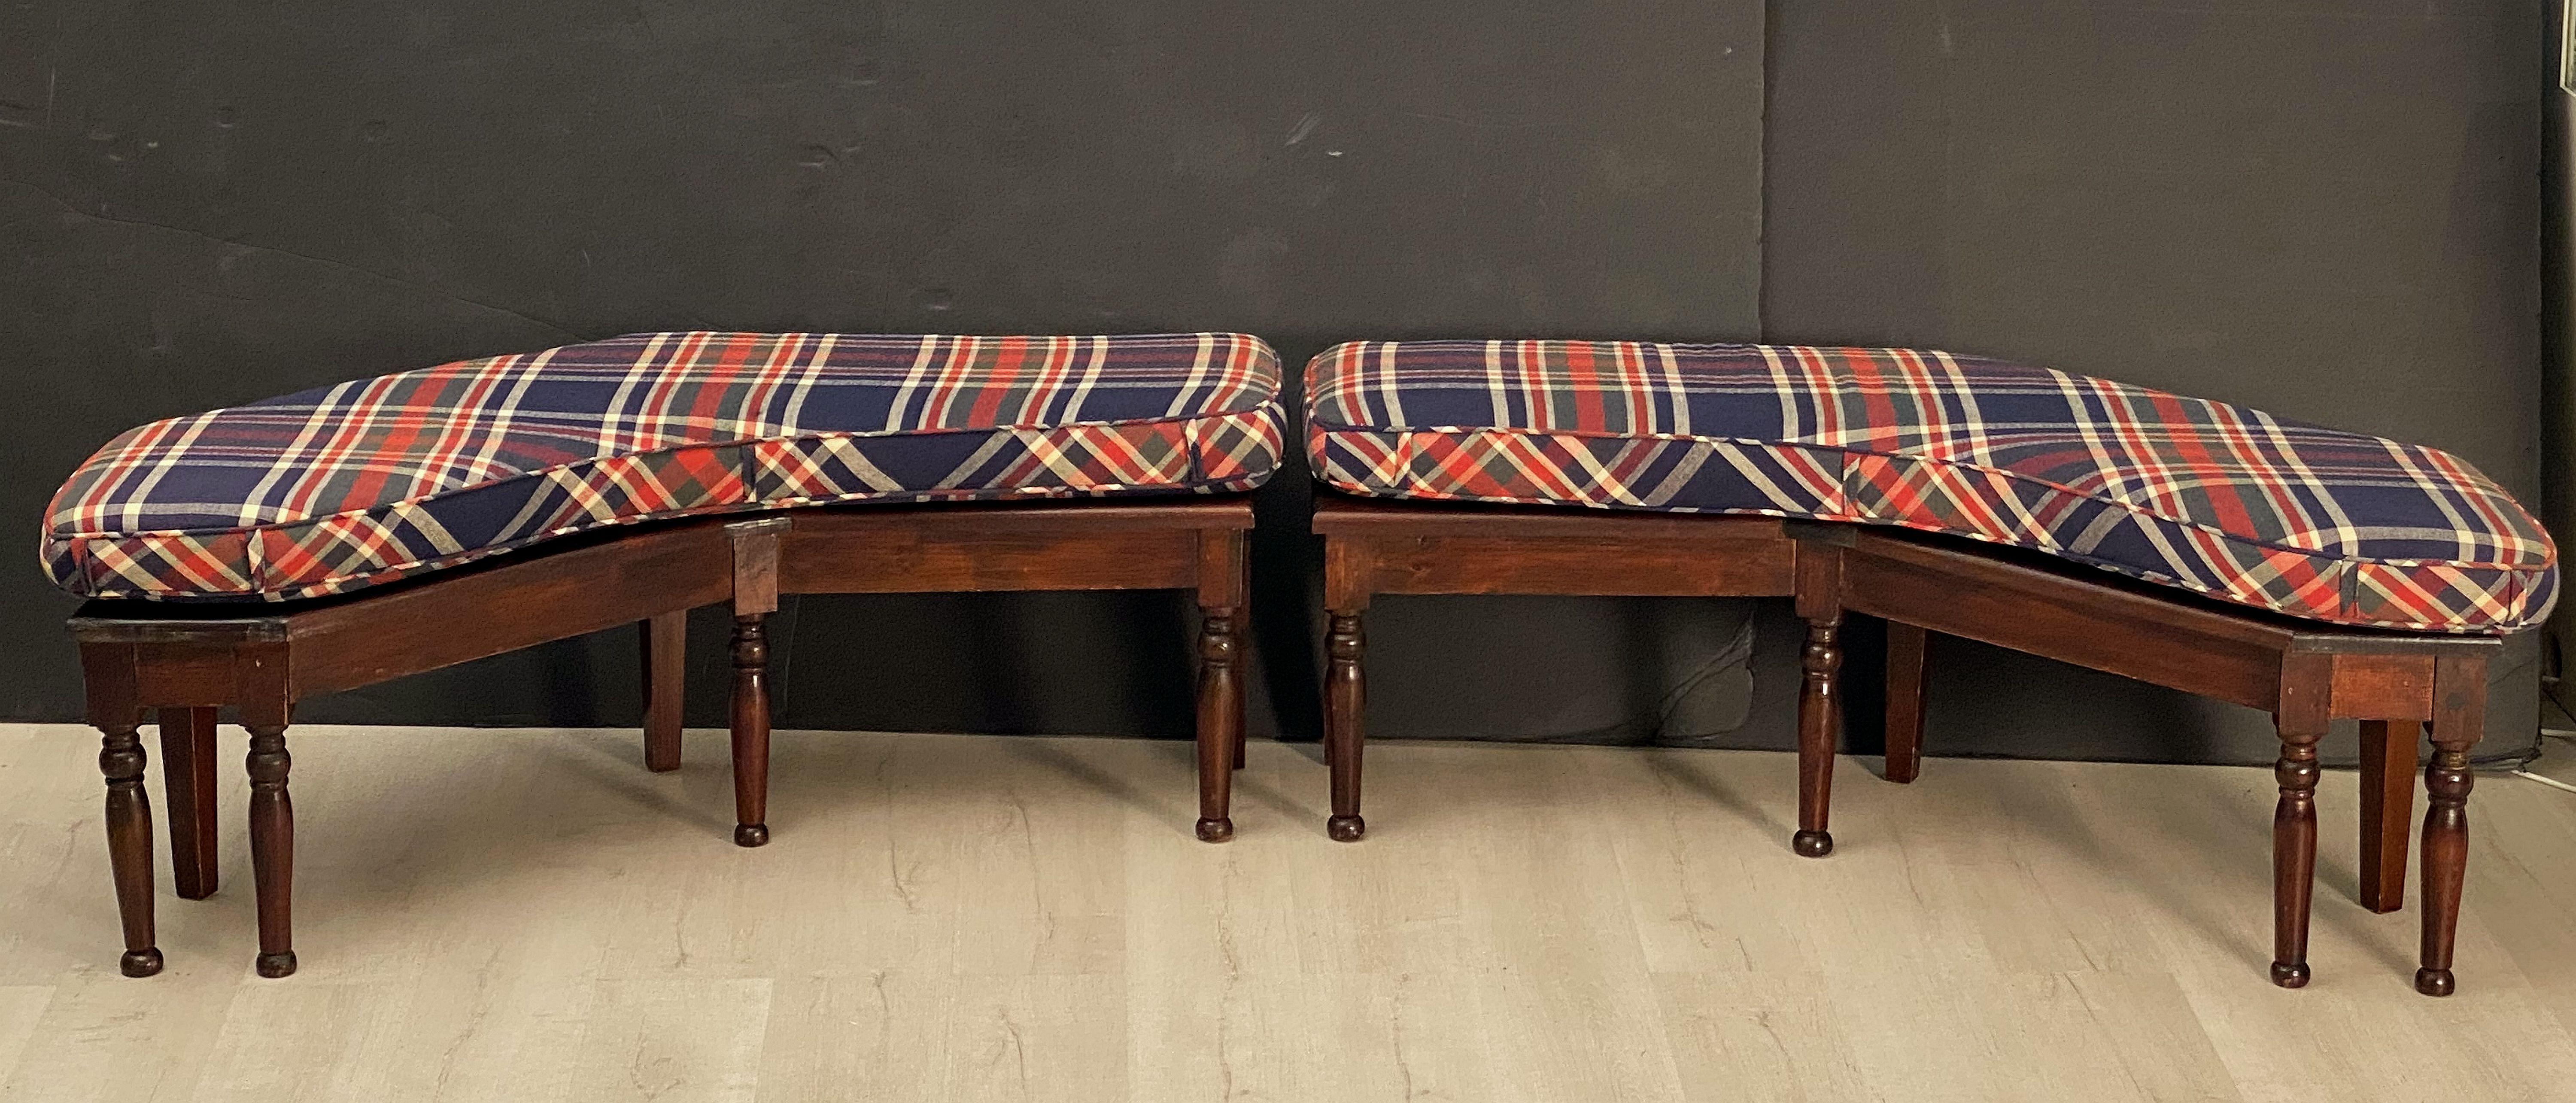 A fine pair of English canted benches or window seats of stained pine with optional cushions upholstered in a plaid or tartan pattern - each bench featuring a canted moulded top with turned leg supports.

Seat Height With Cushion: 19 inches

Seat